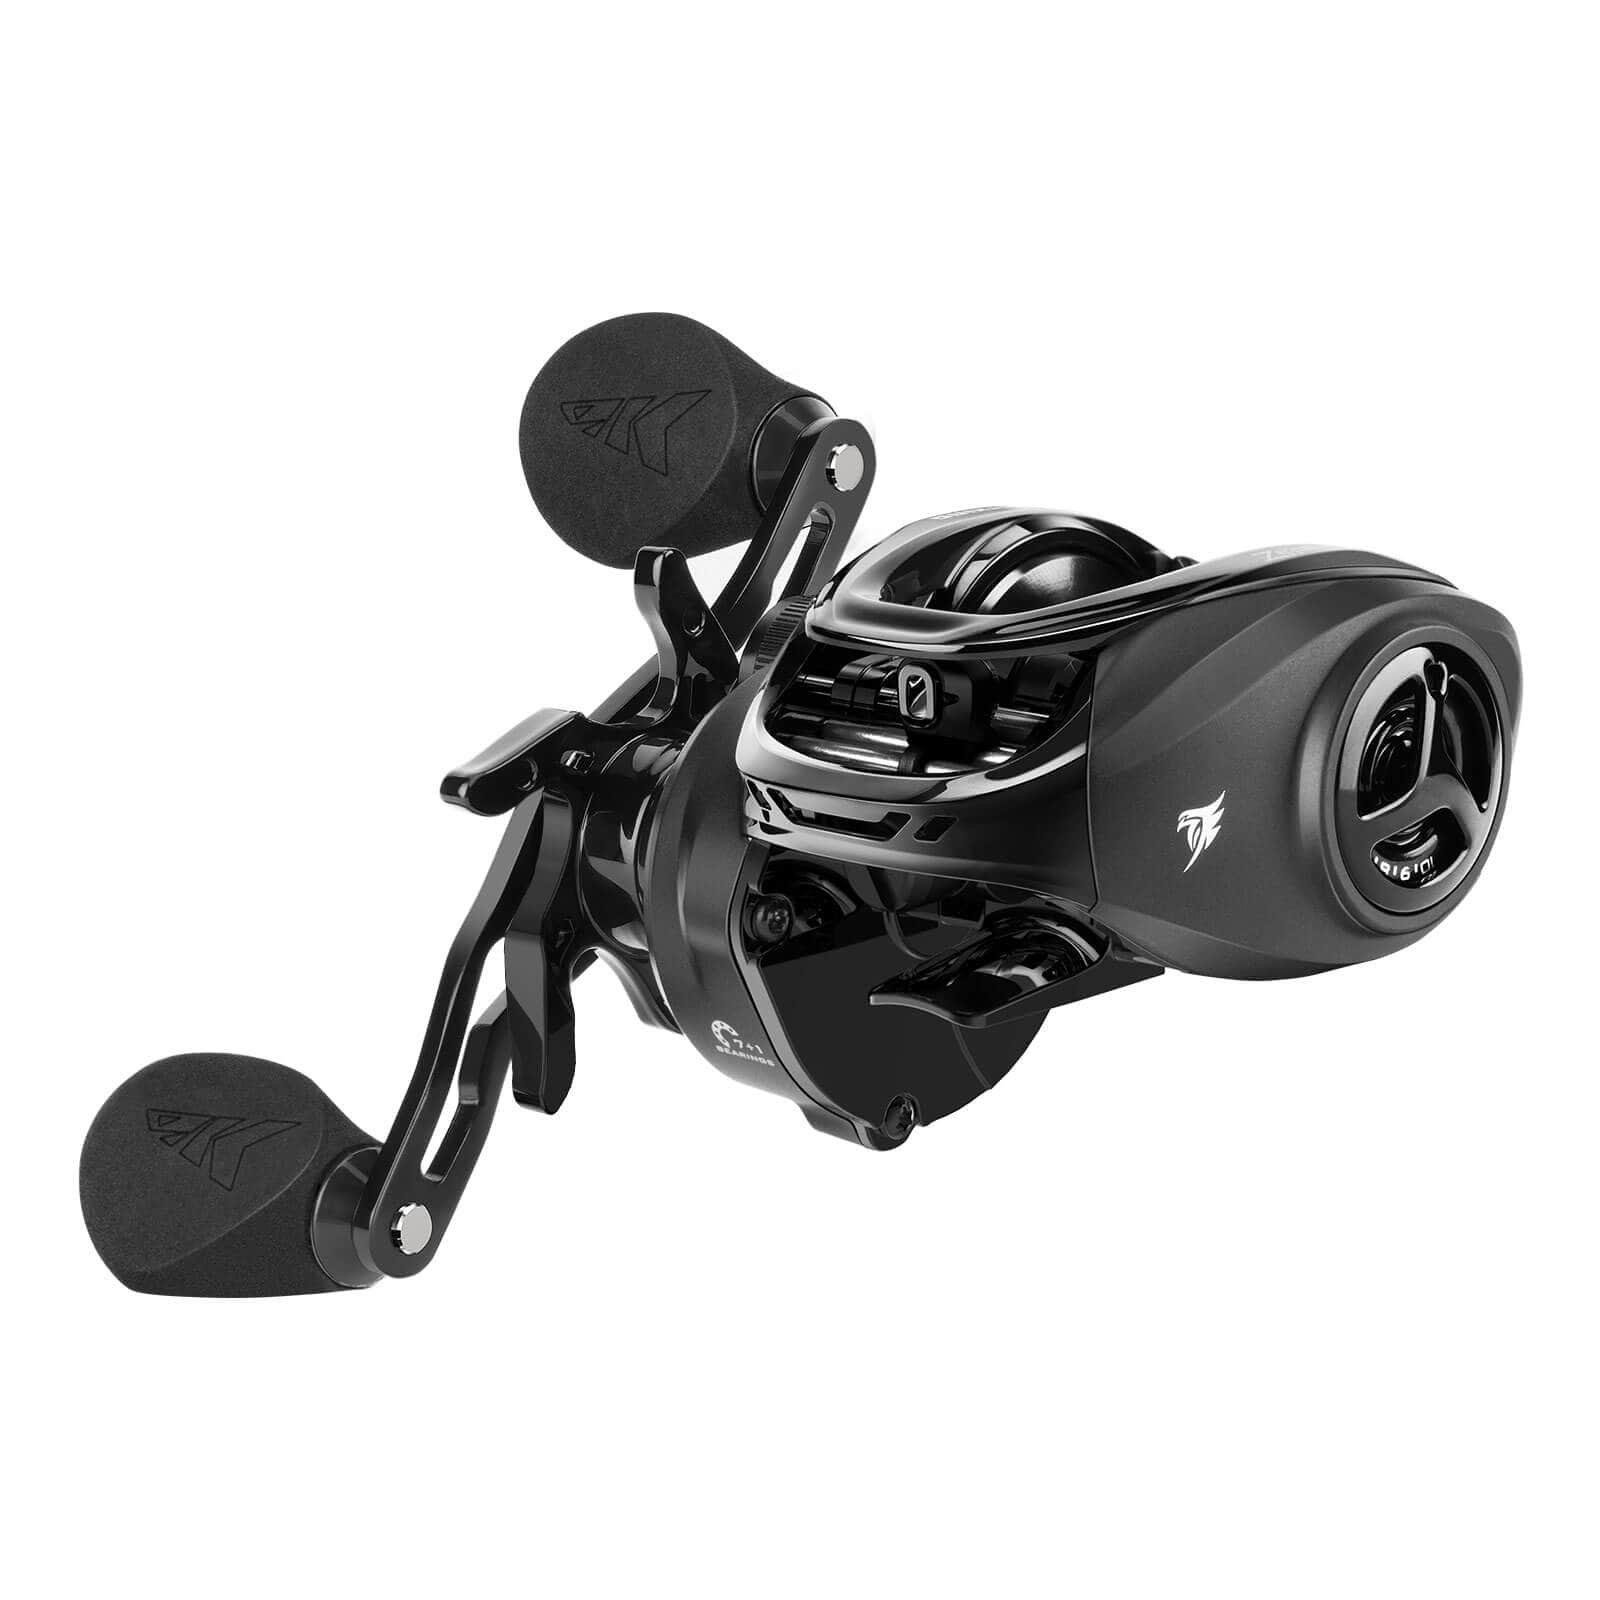 KASTKING Zephyr Spinning Reel Review: I Catch My First Ever